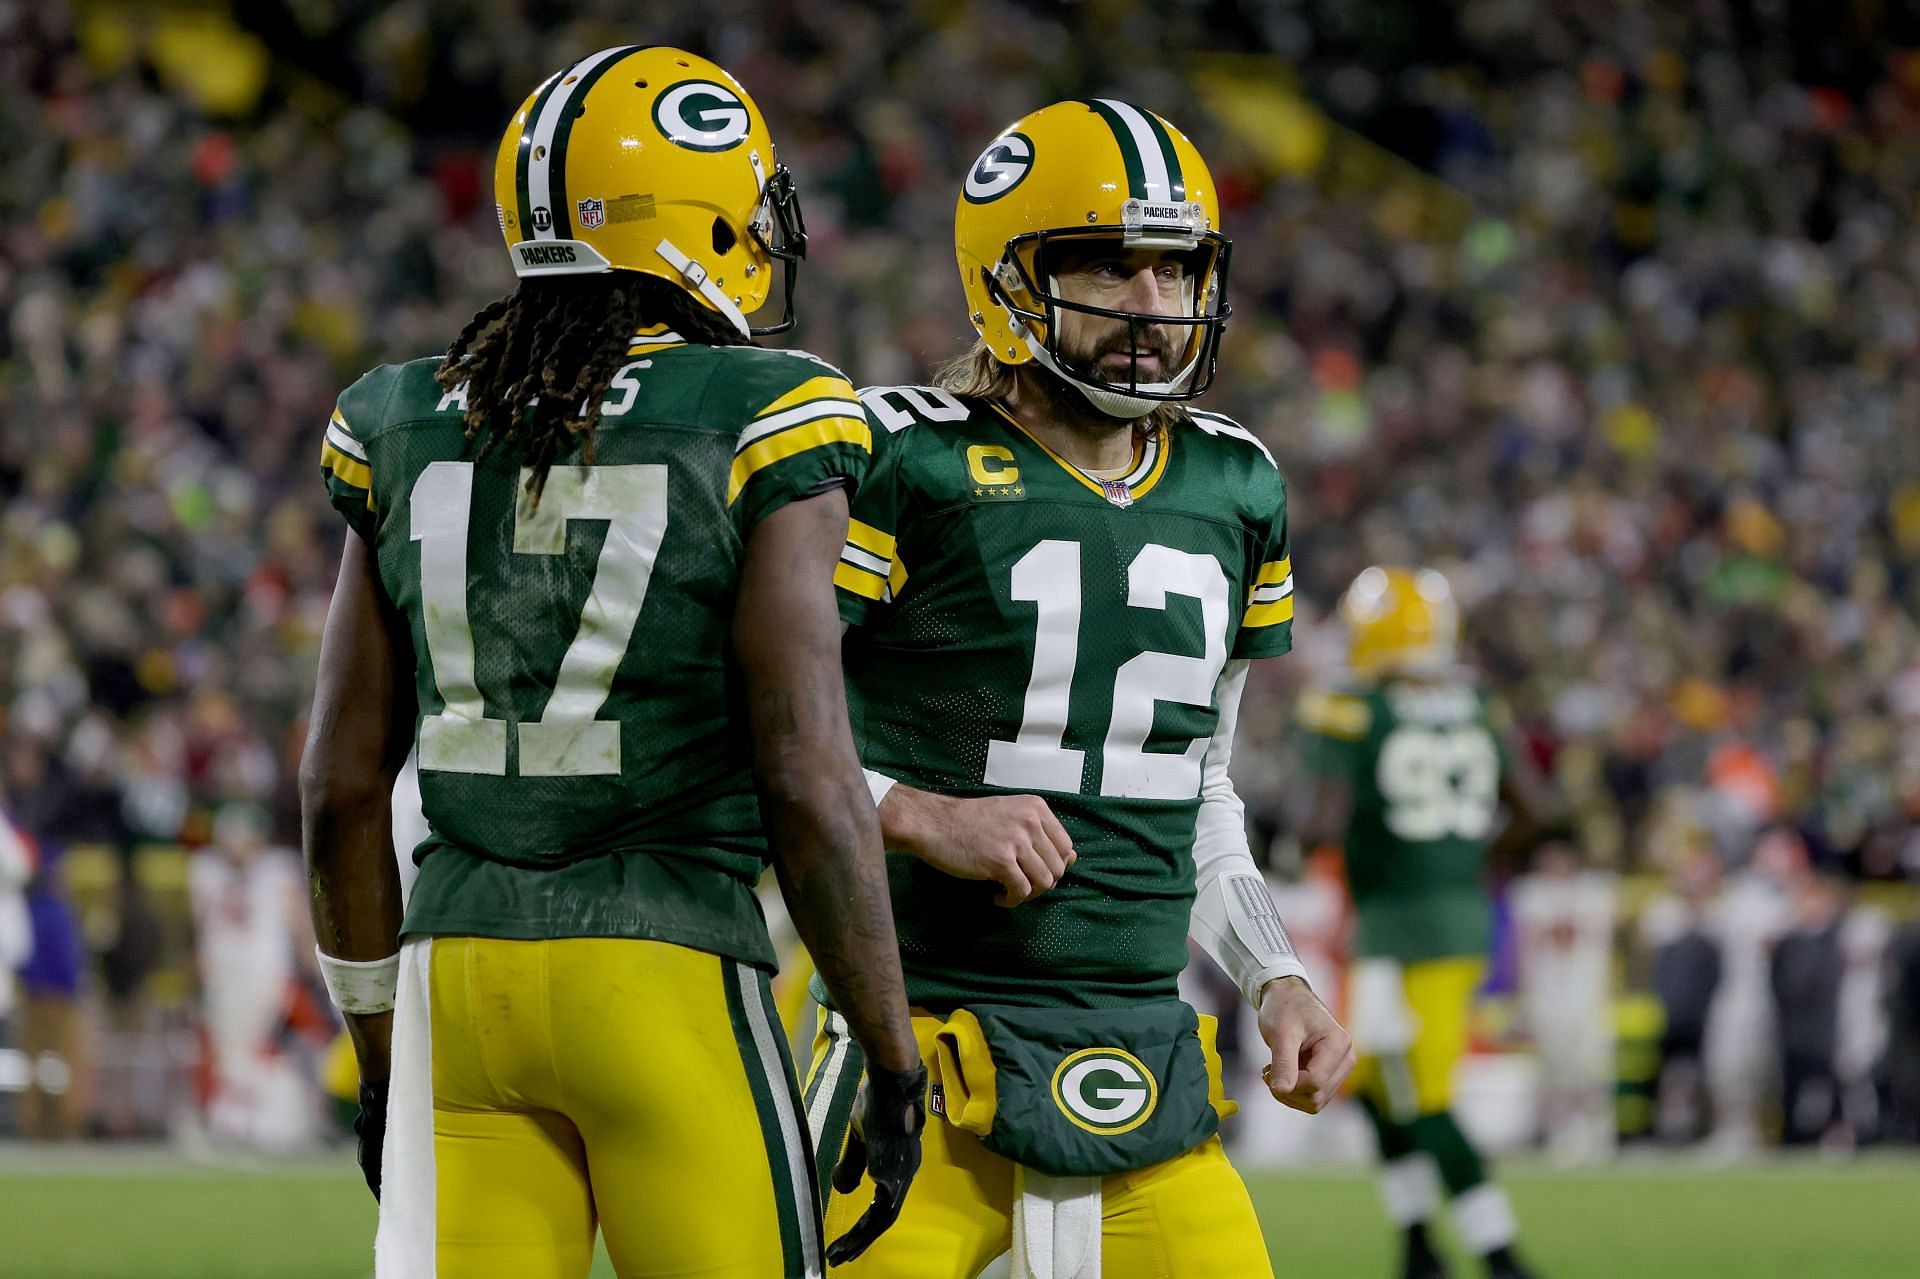 Davante Adams and Aaron Rodgers celebrate scoring a touchdown against the Cleveland Browns